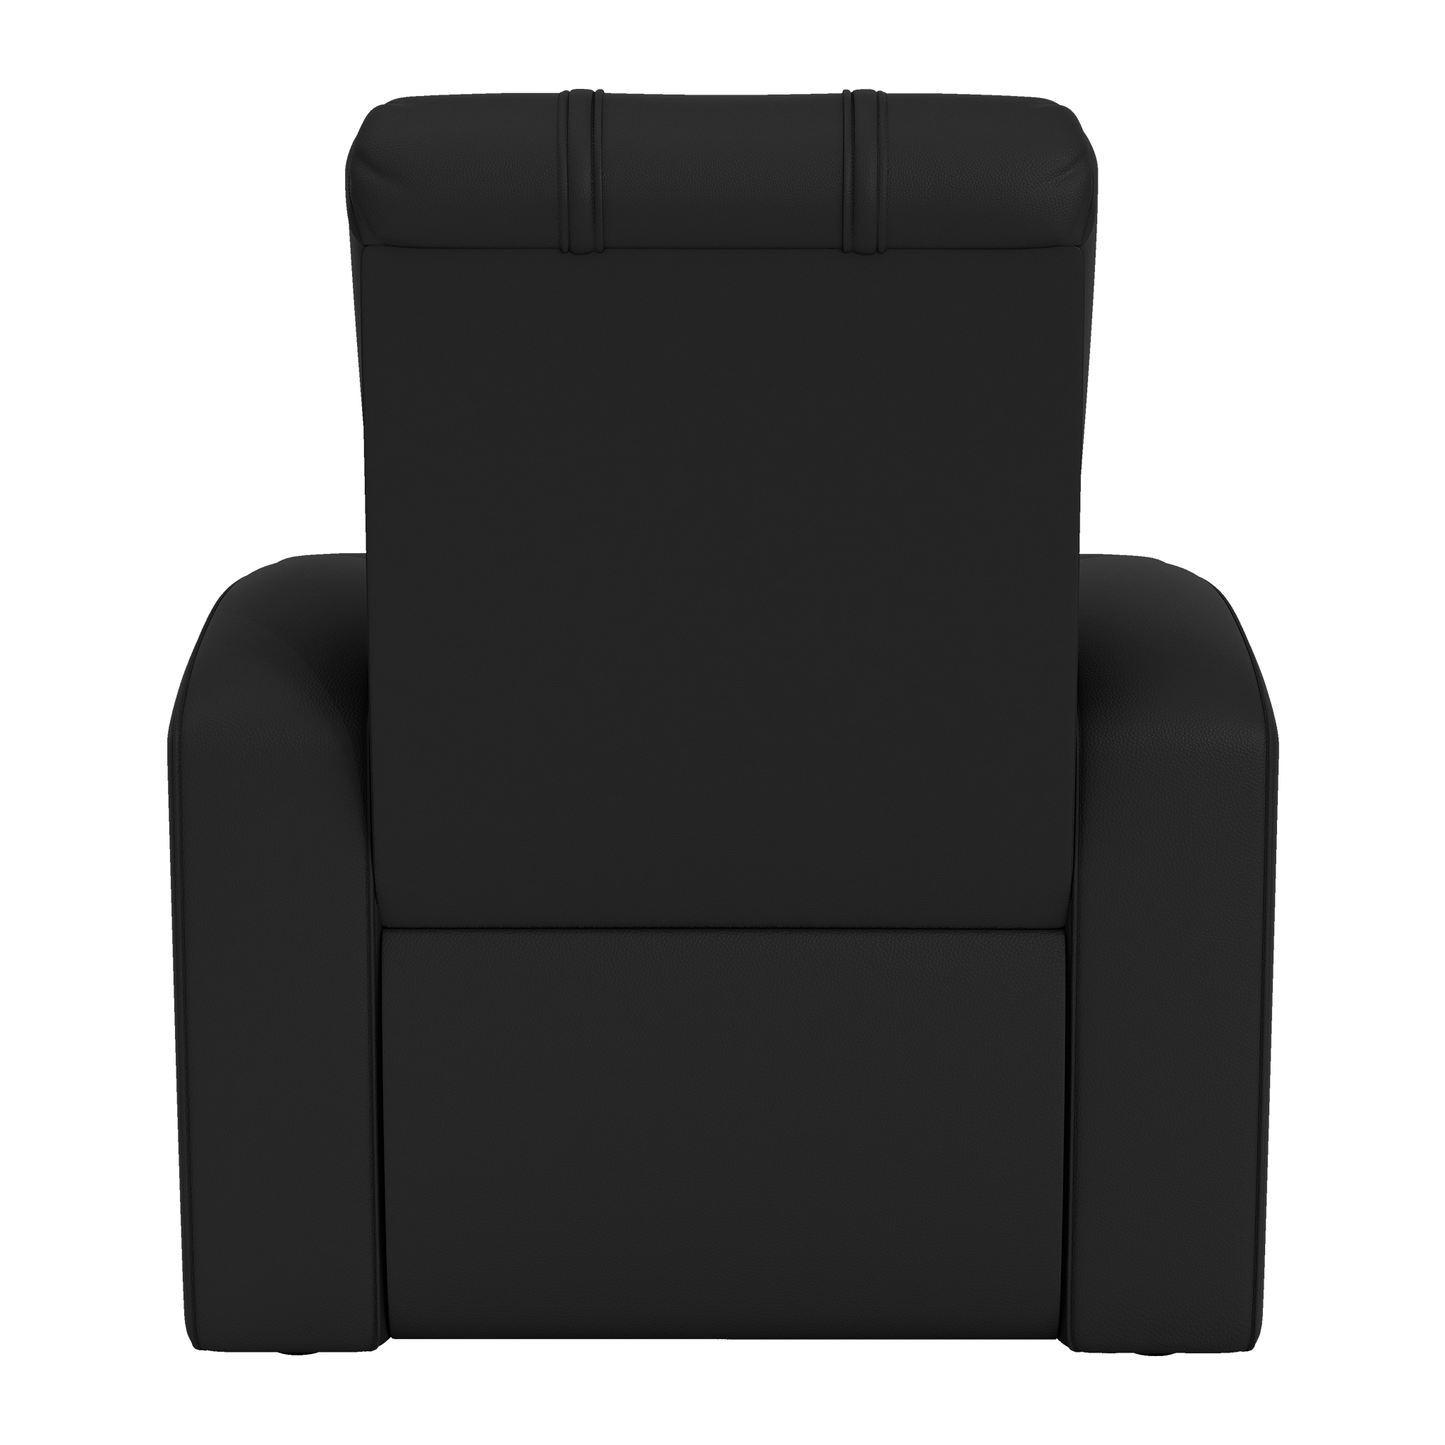 Relax Home Theater Recliner with Colorado Avalanche Logo